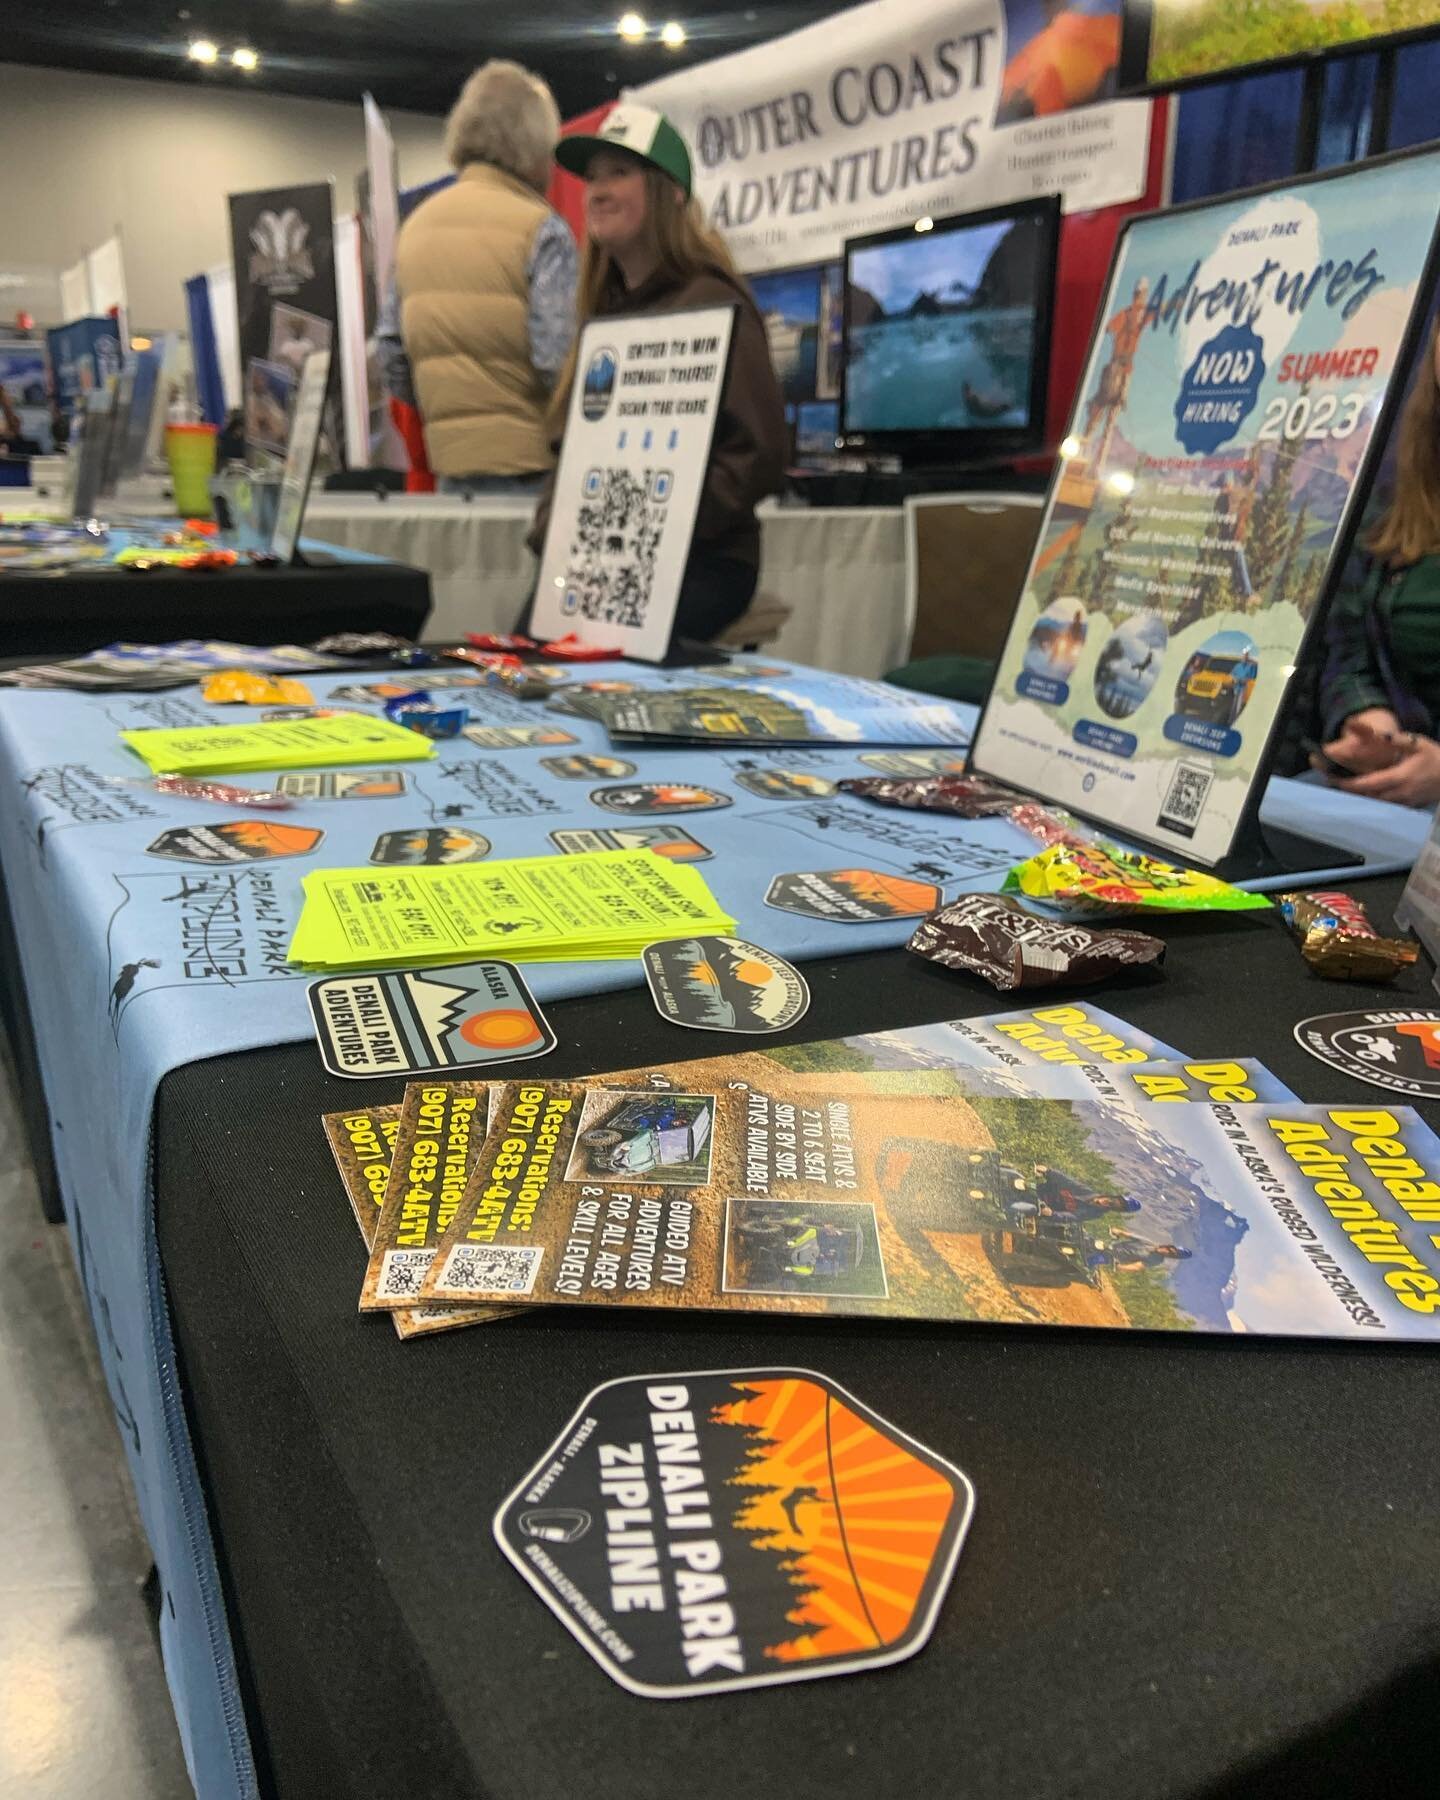 Last day of the Sportsman show, and of the last of these events before the season starts! Summer is right around the corner and we are already hyped to get out there!